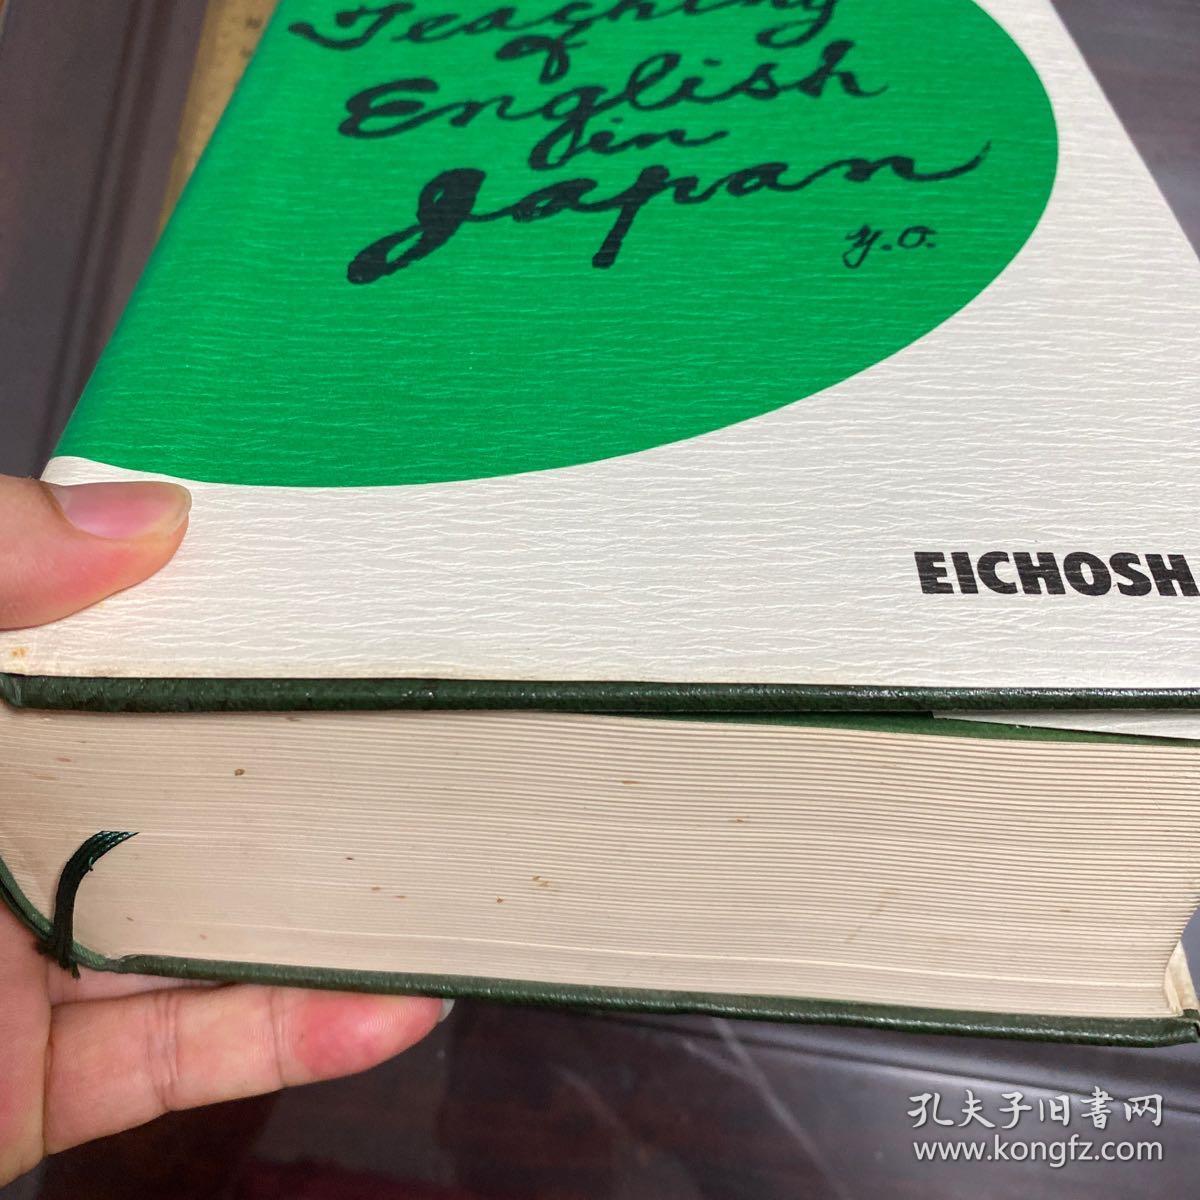 The teaching of English in Japan History of English vocabulary language culture society philosophy英文原版精装超重